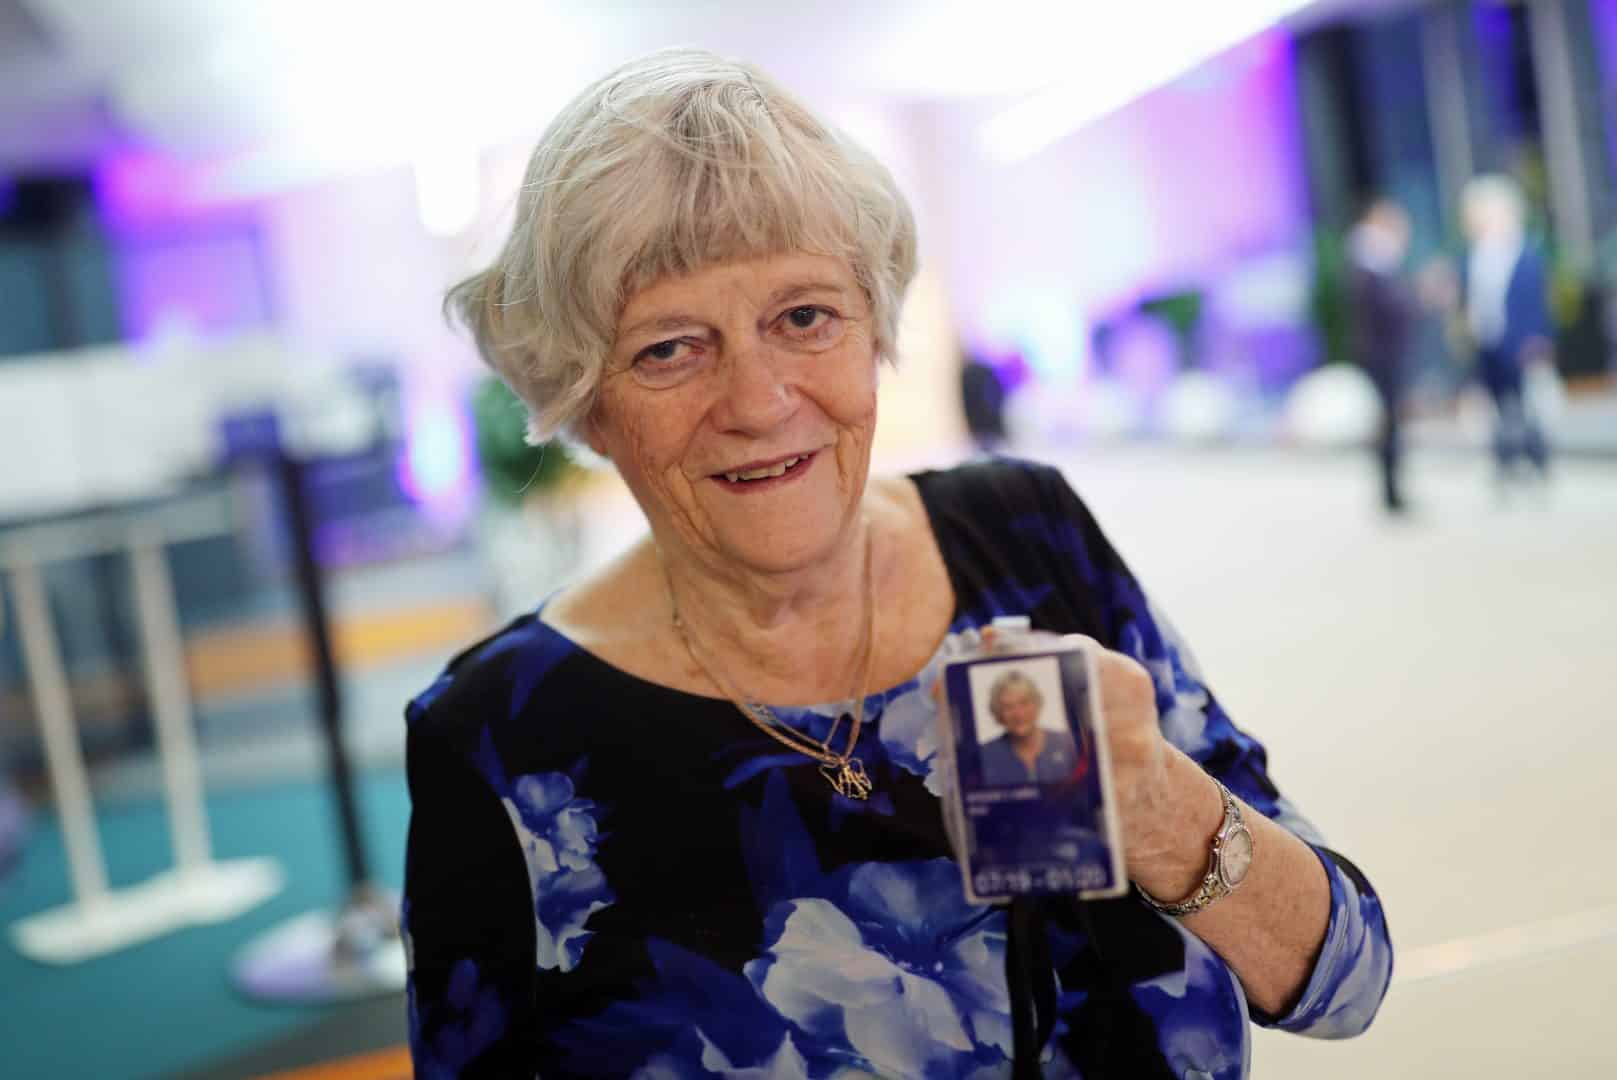 Ann Widdecombe says she is ‘tired of hearing nonsense’ about Brexit depriving young Britons